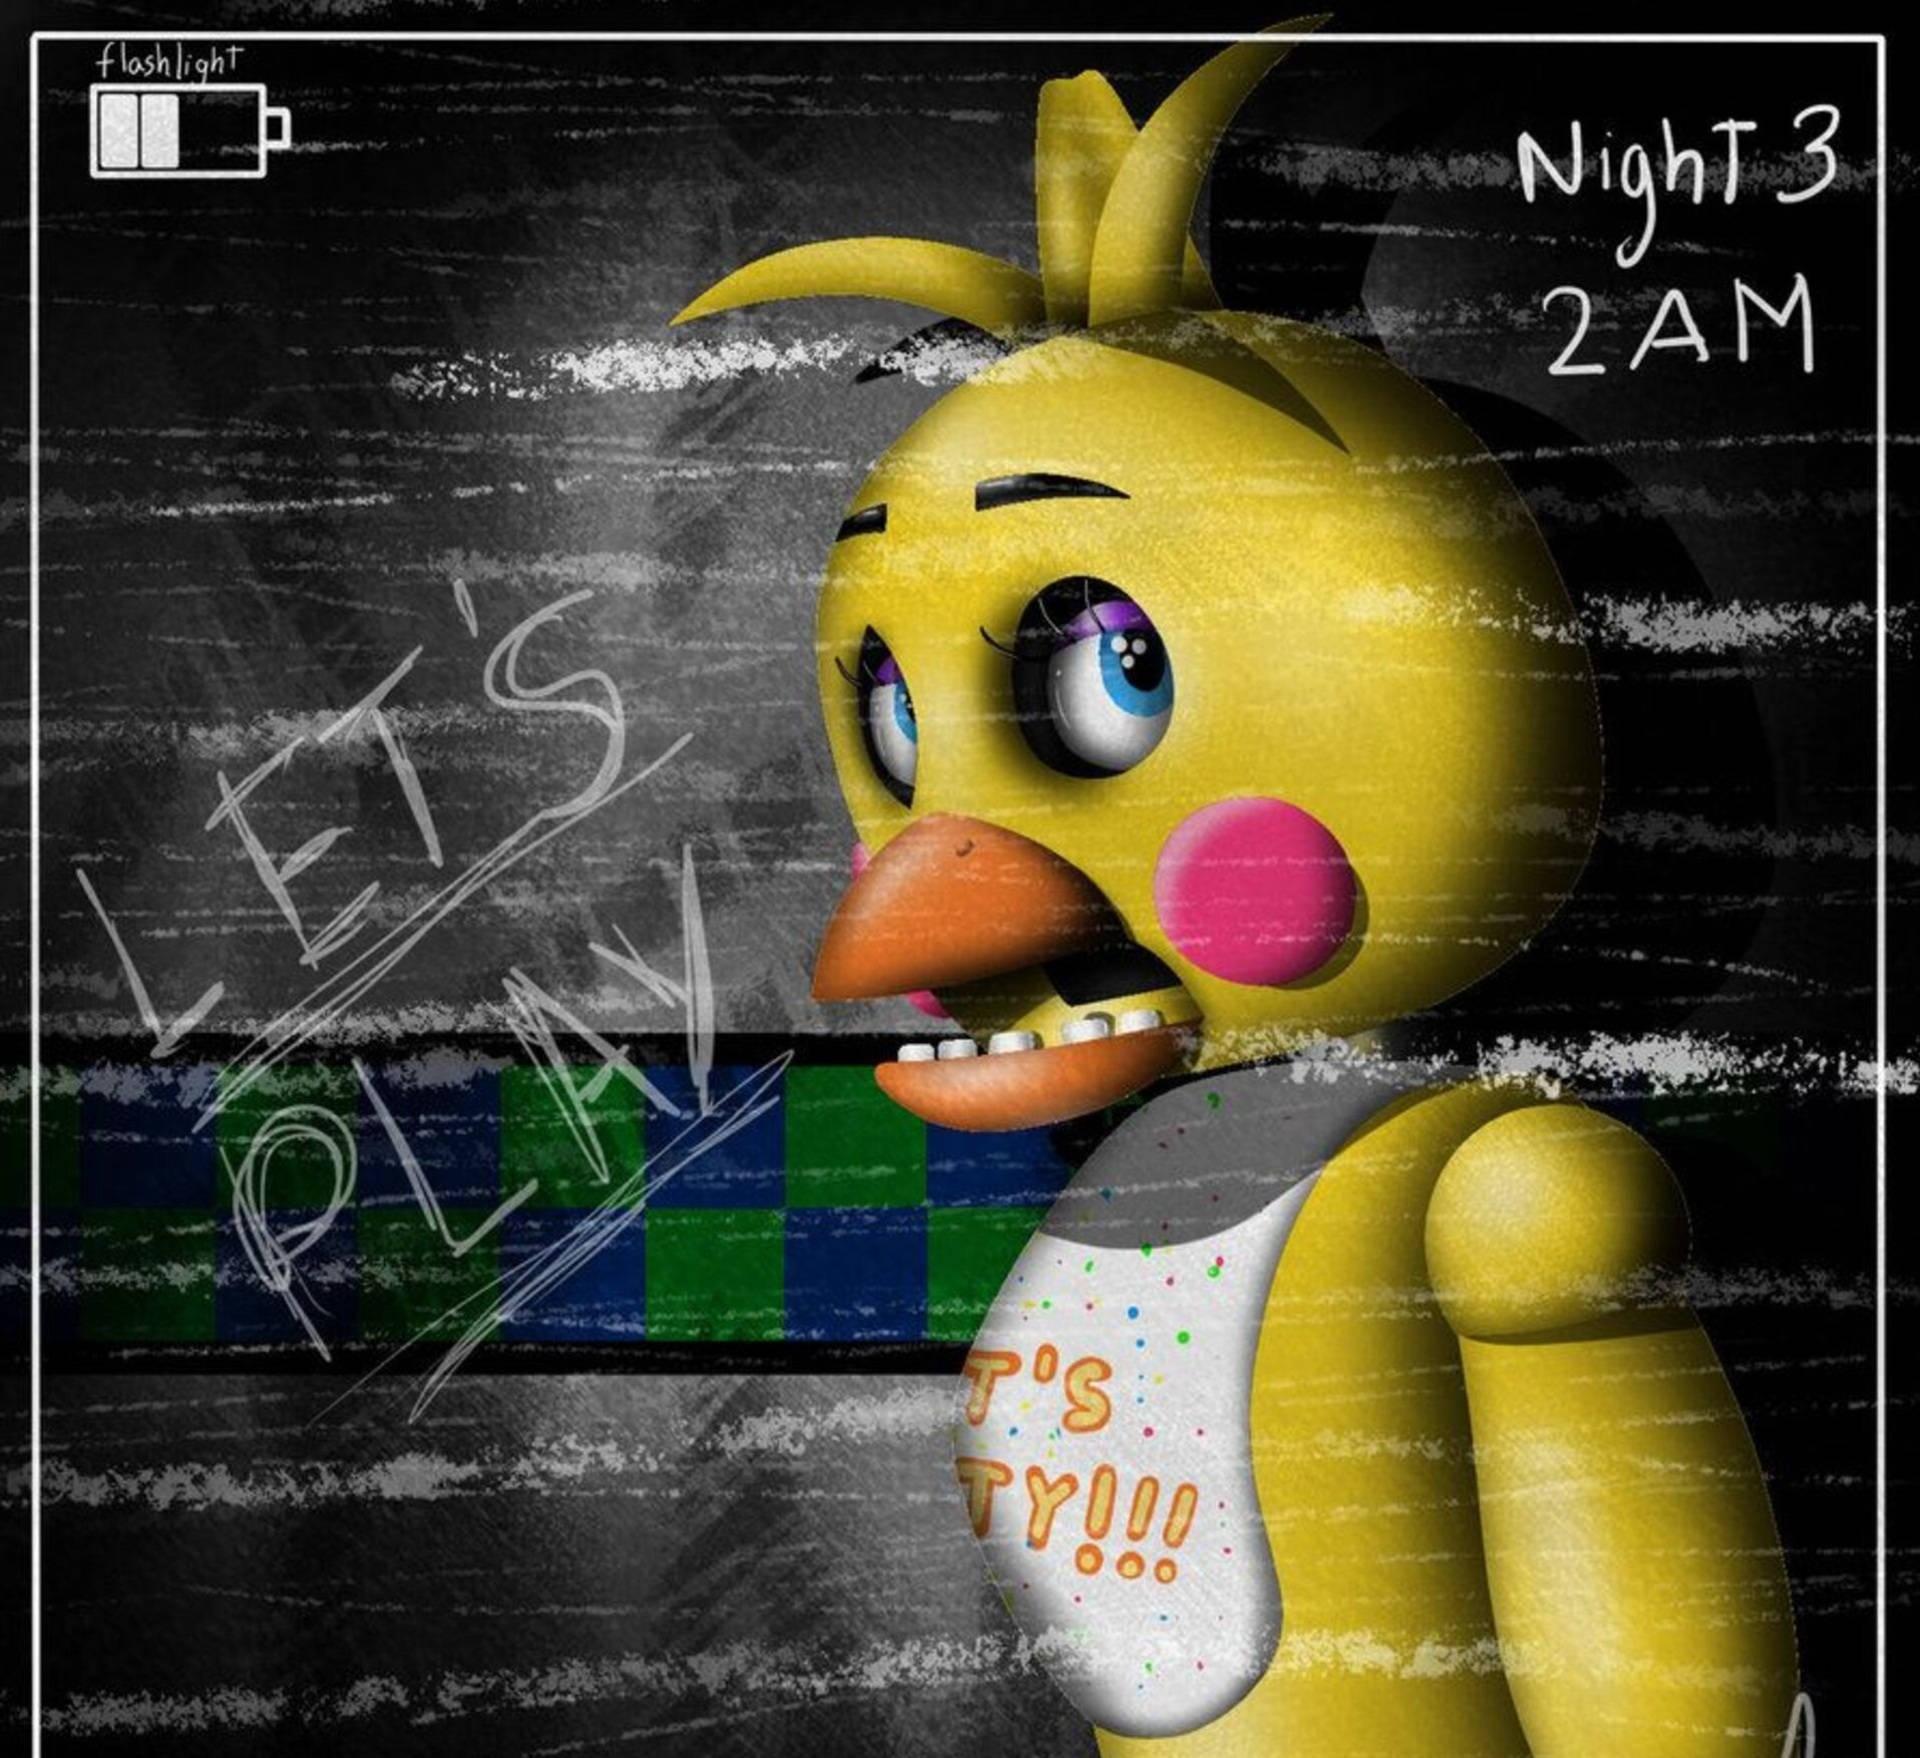 Creepy Fnaf Chica Let's Play Background